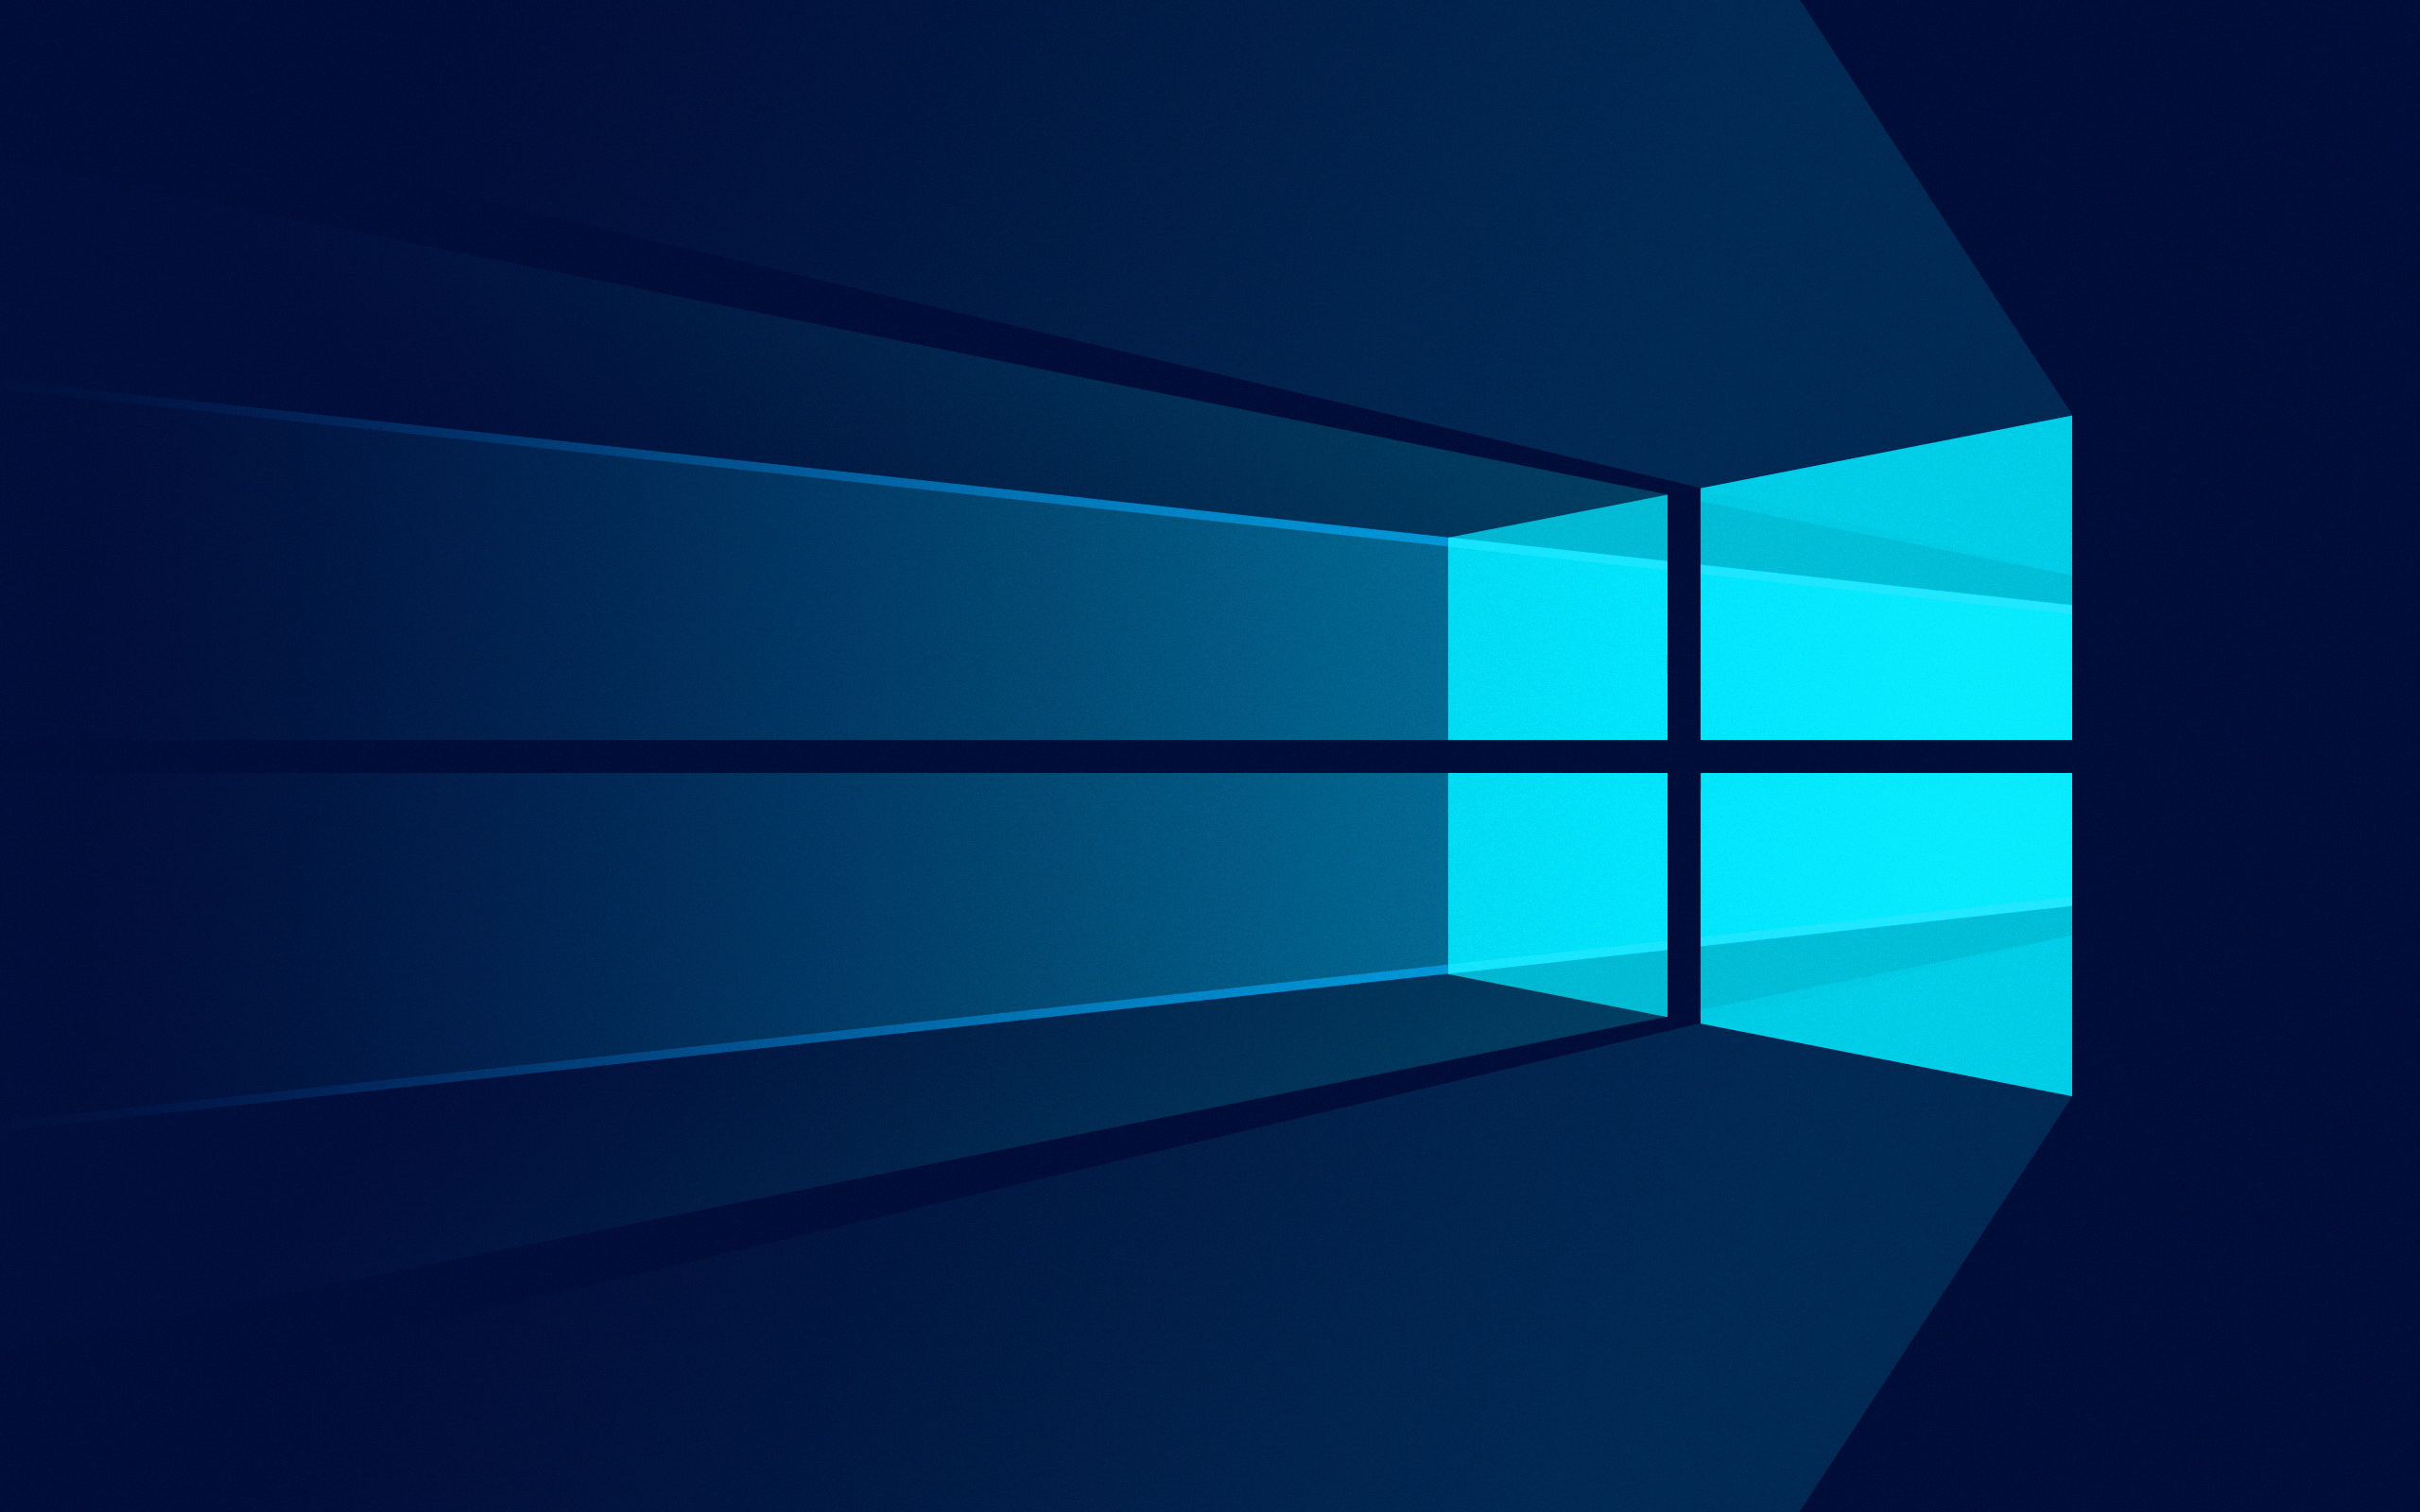 Windows hd papers and backgrounds